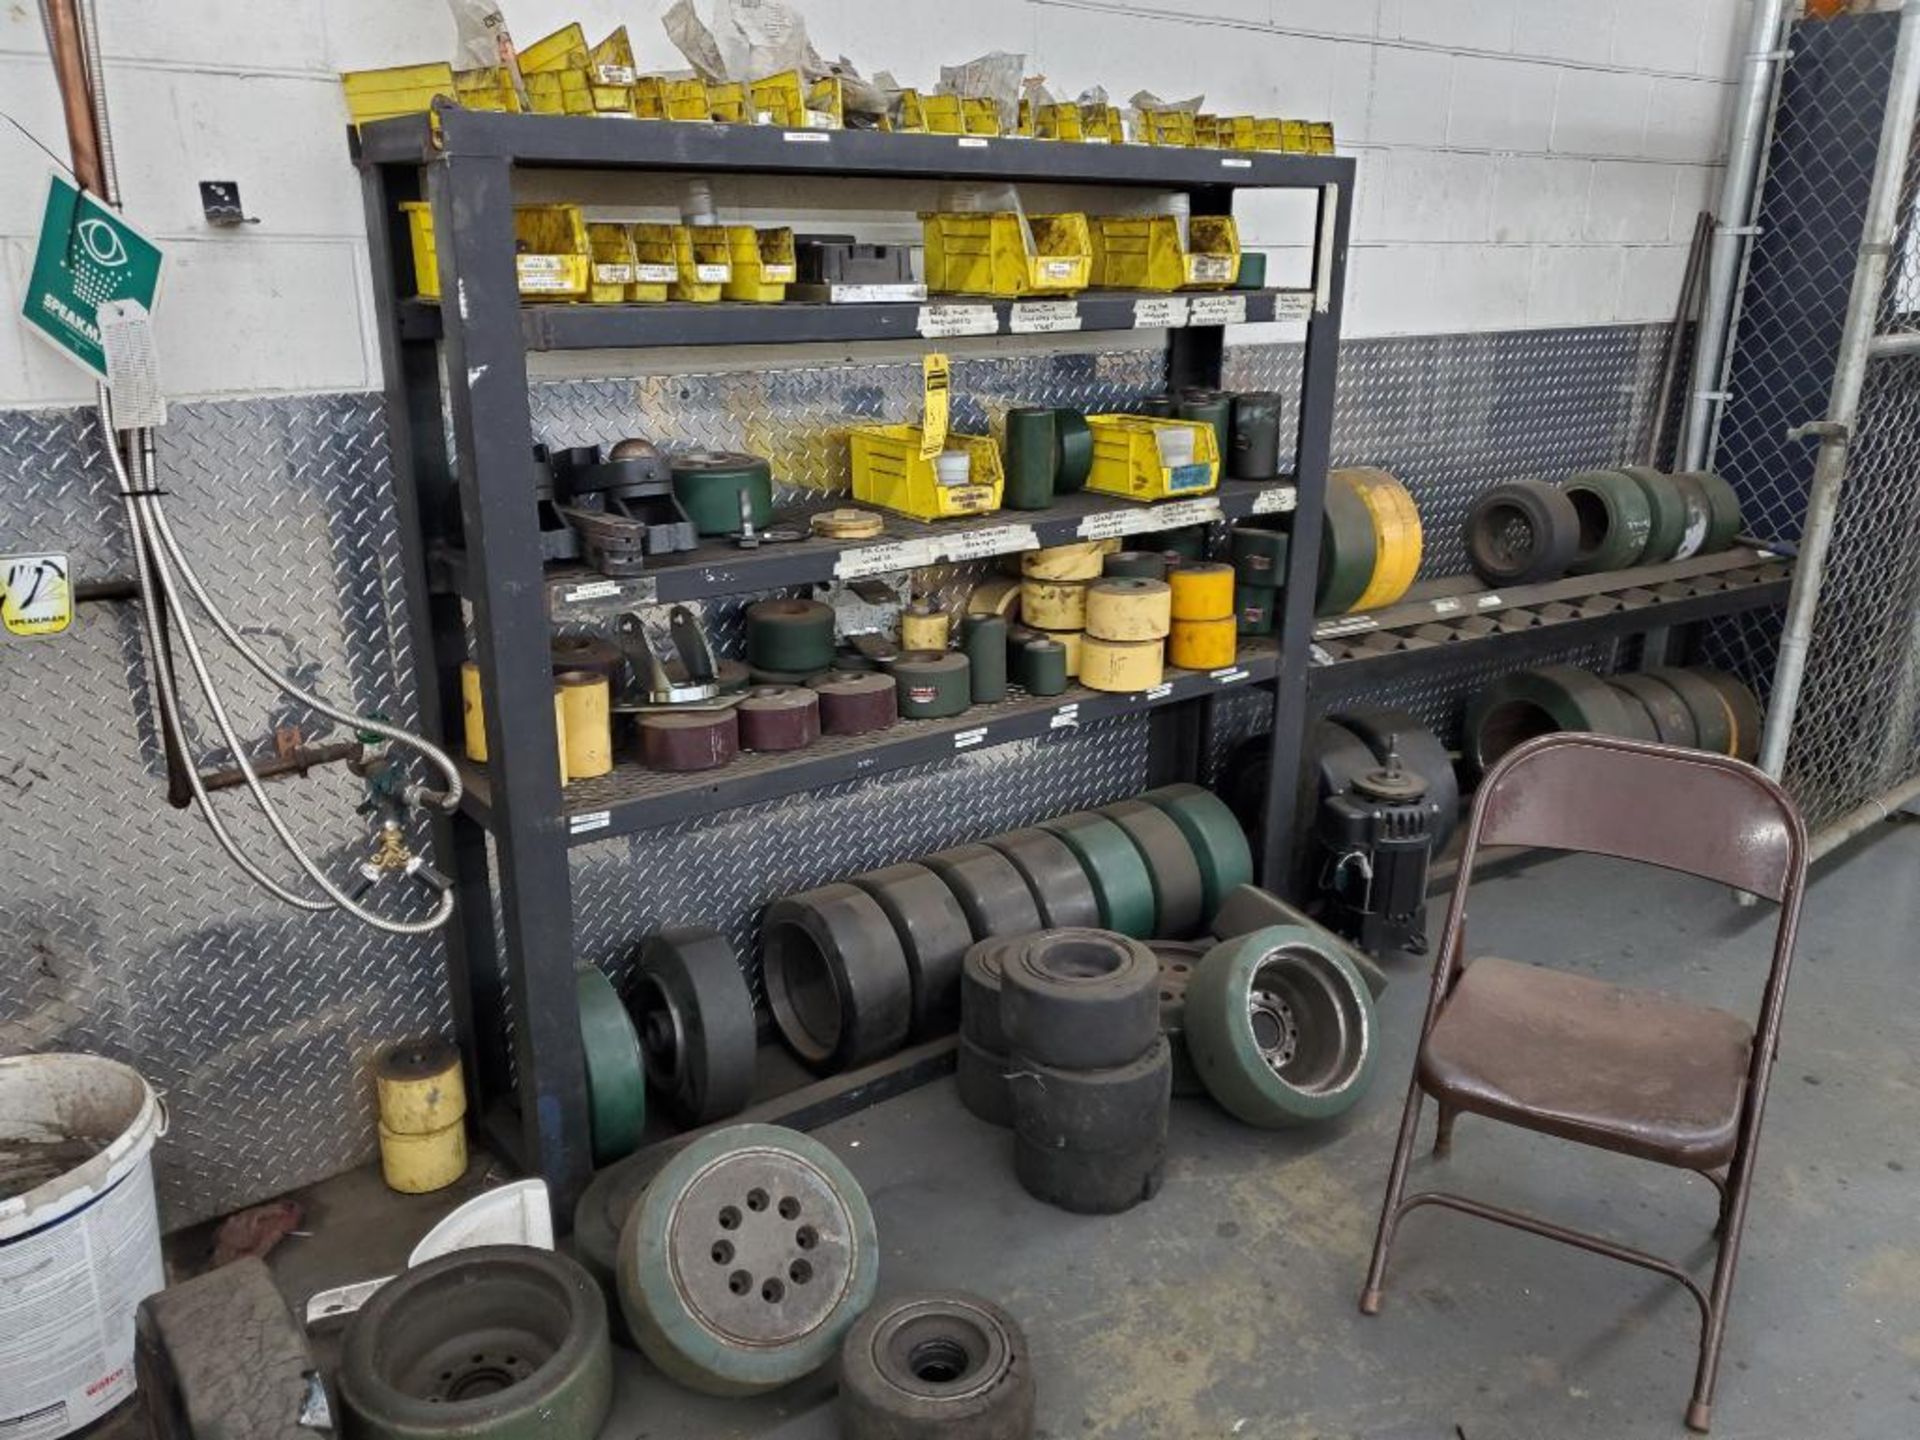 Steel Rack w/ Order Picker & Forklifts Solid Tires, Outrigger Load Wheels, Caster Wheels & Misc. (Wh - Image 2 of 7